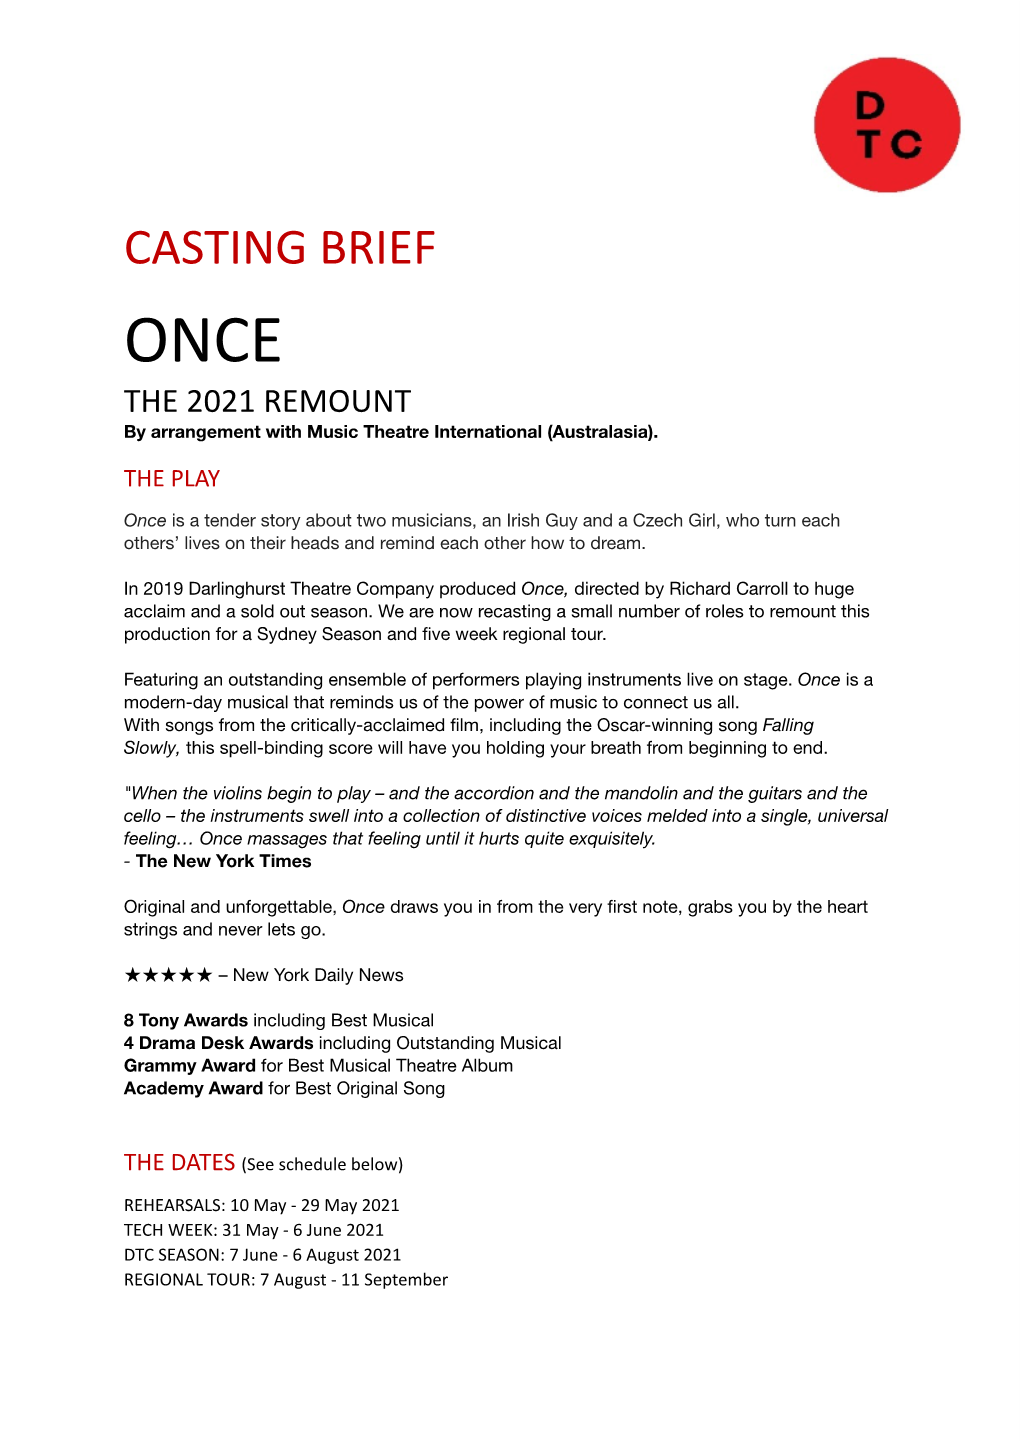 ONCE the 2021 REMOUNT by Arrangement with Music Theatre International (Australasia)